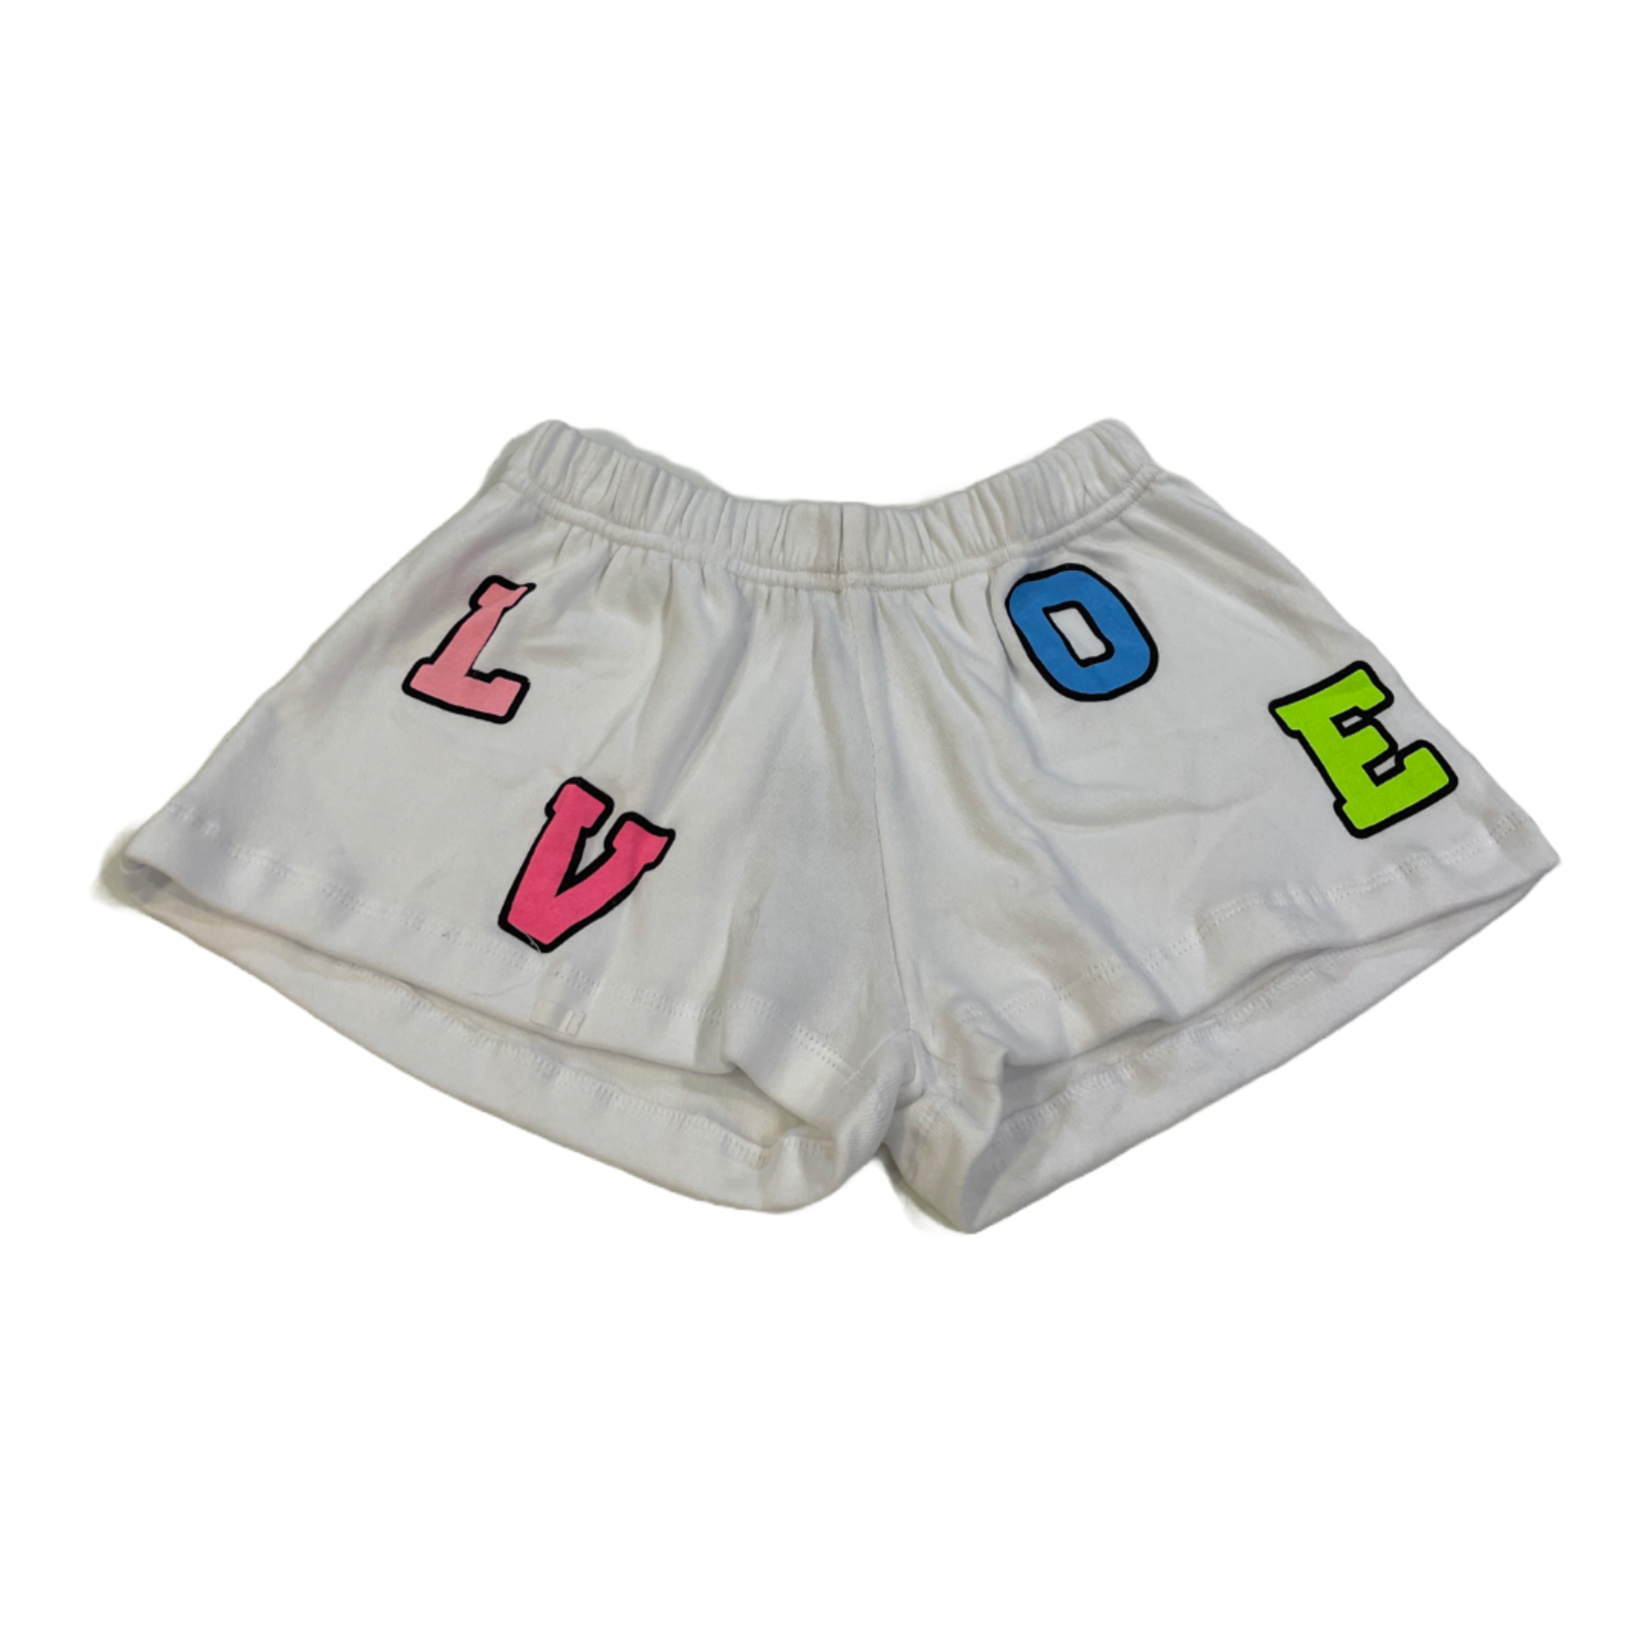 Flowers By Zoe White Love Shorts